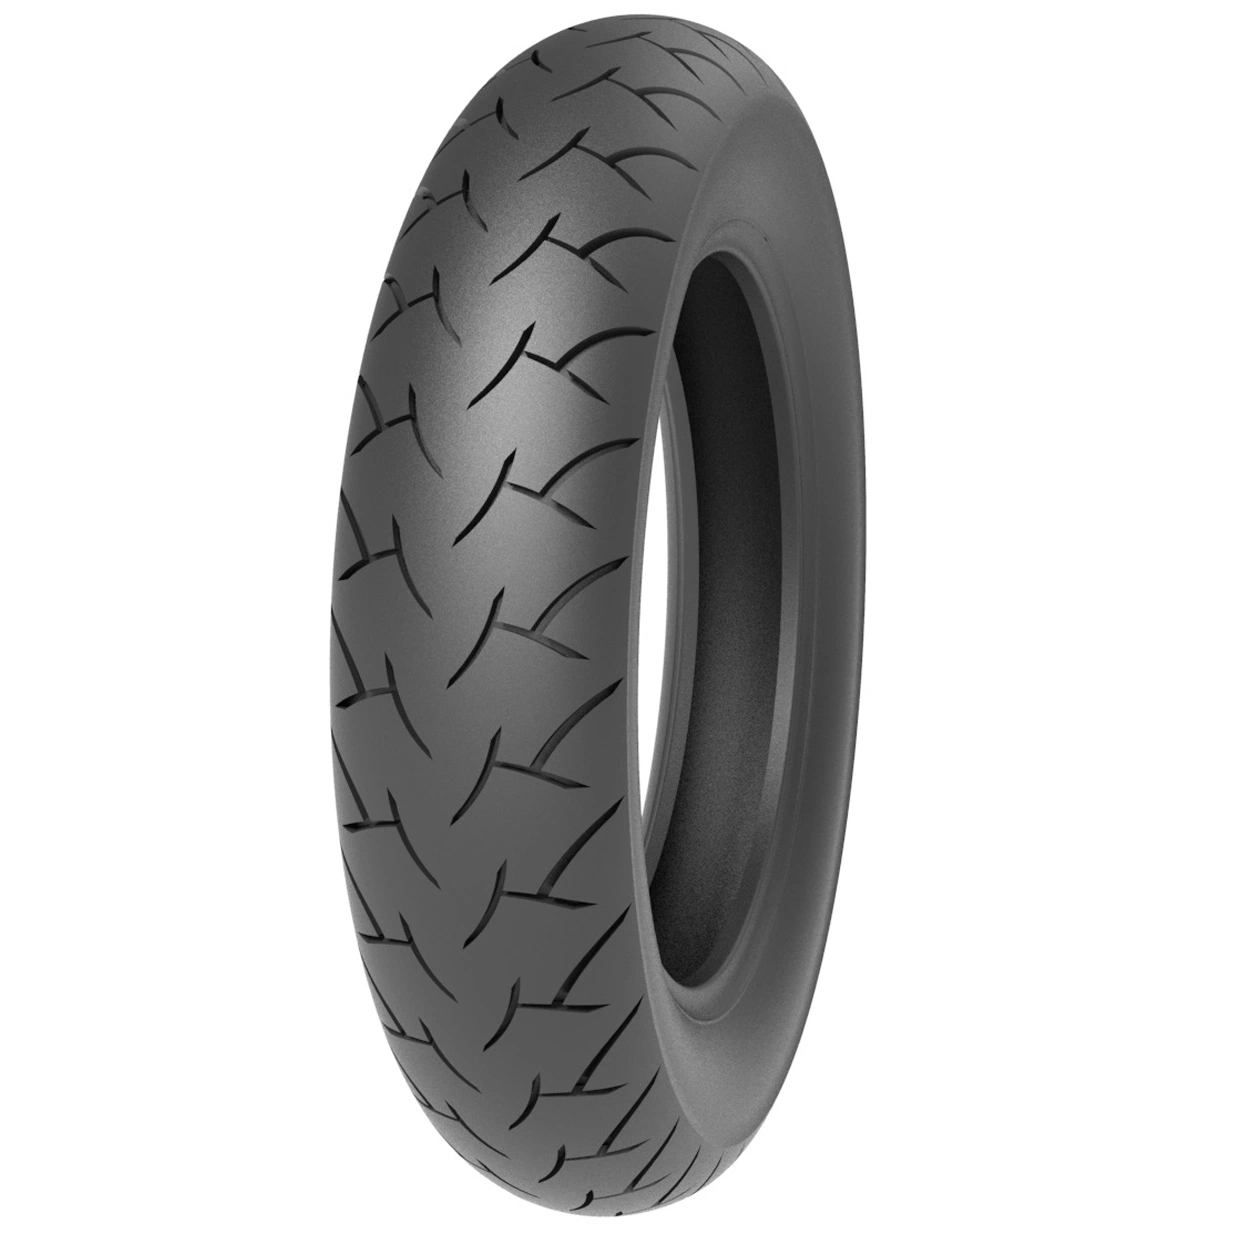 TIMSUN TS-980R, 15 Inch, 16 Inch, 17 Inch, 18 Inch, Cruise Motorcycle Tyre,High Mileage and High Grip, ISO9001/IATF16949/JIS/E-MARK/DOT/BIS/SNI/CCC Certificated